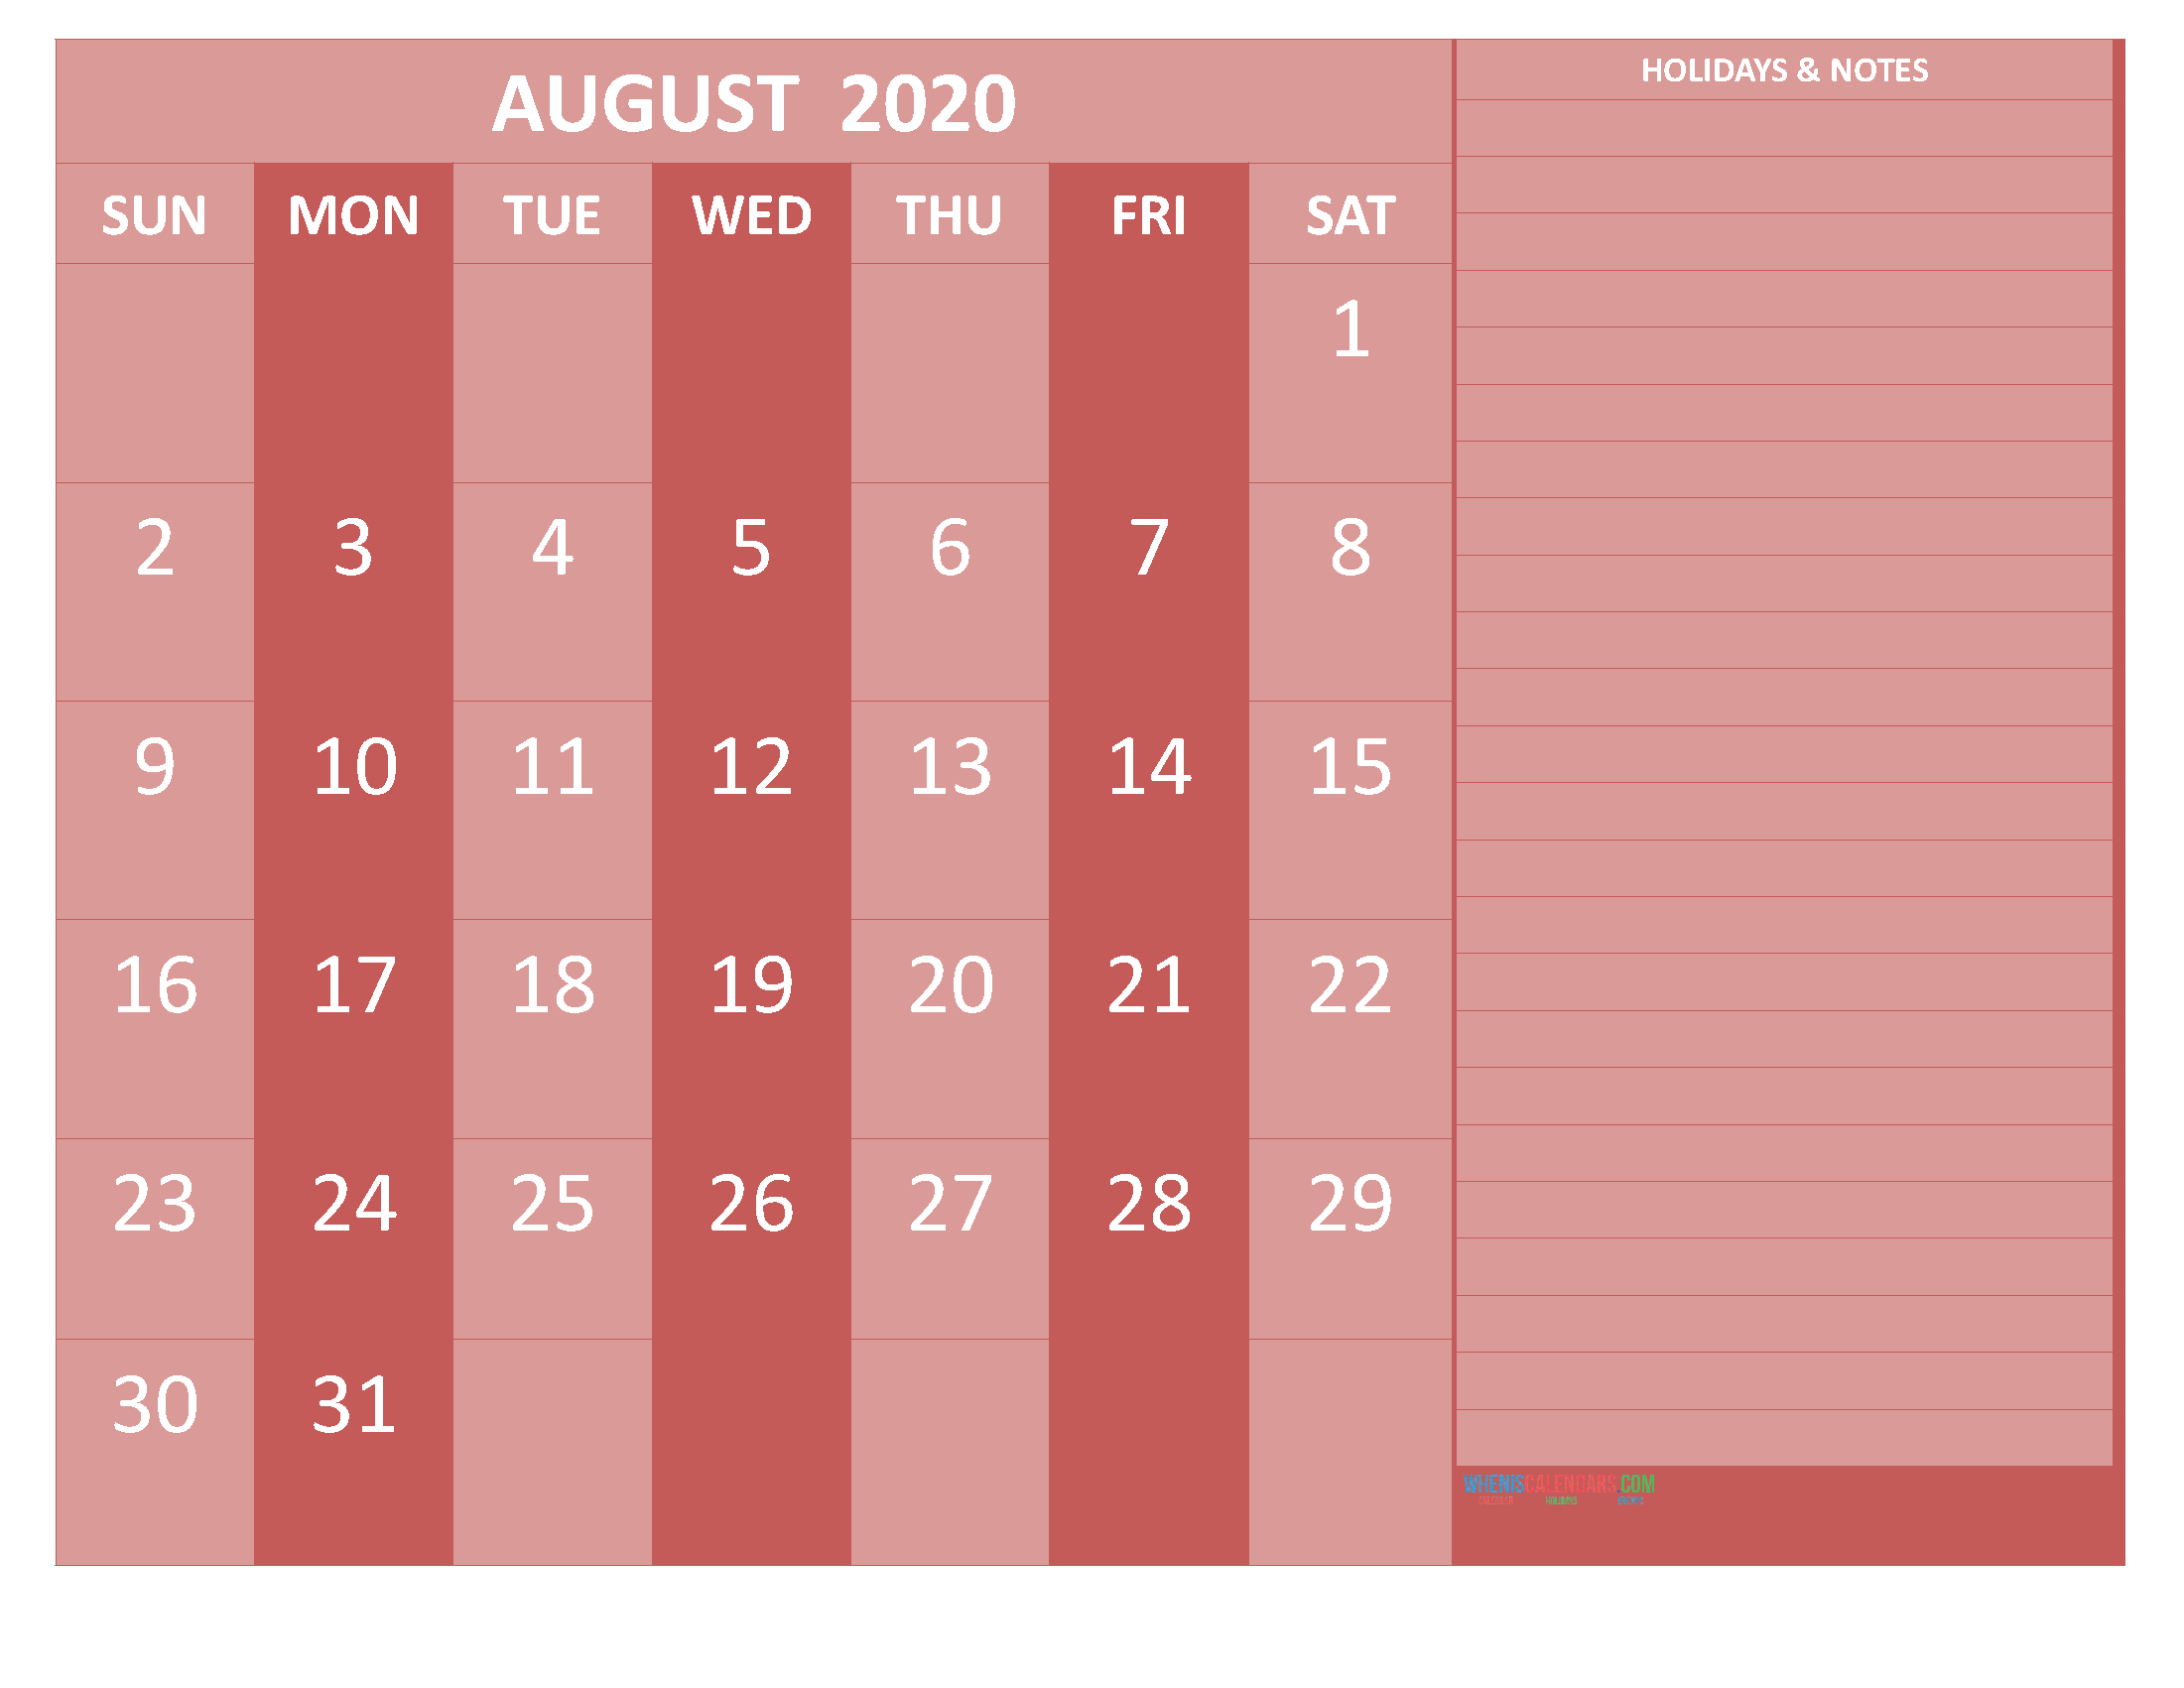 Free Printable Monthly Calendar 2020 August with Holidays